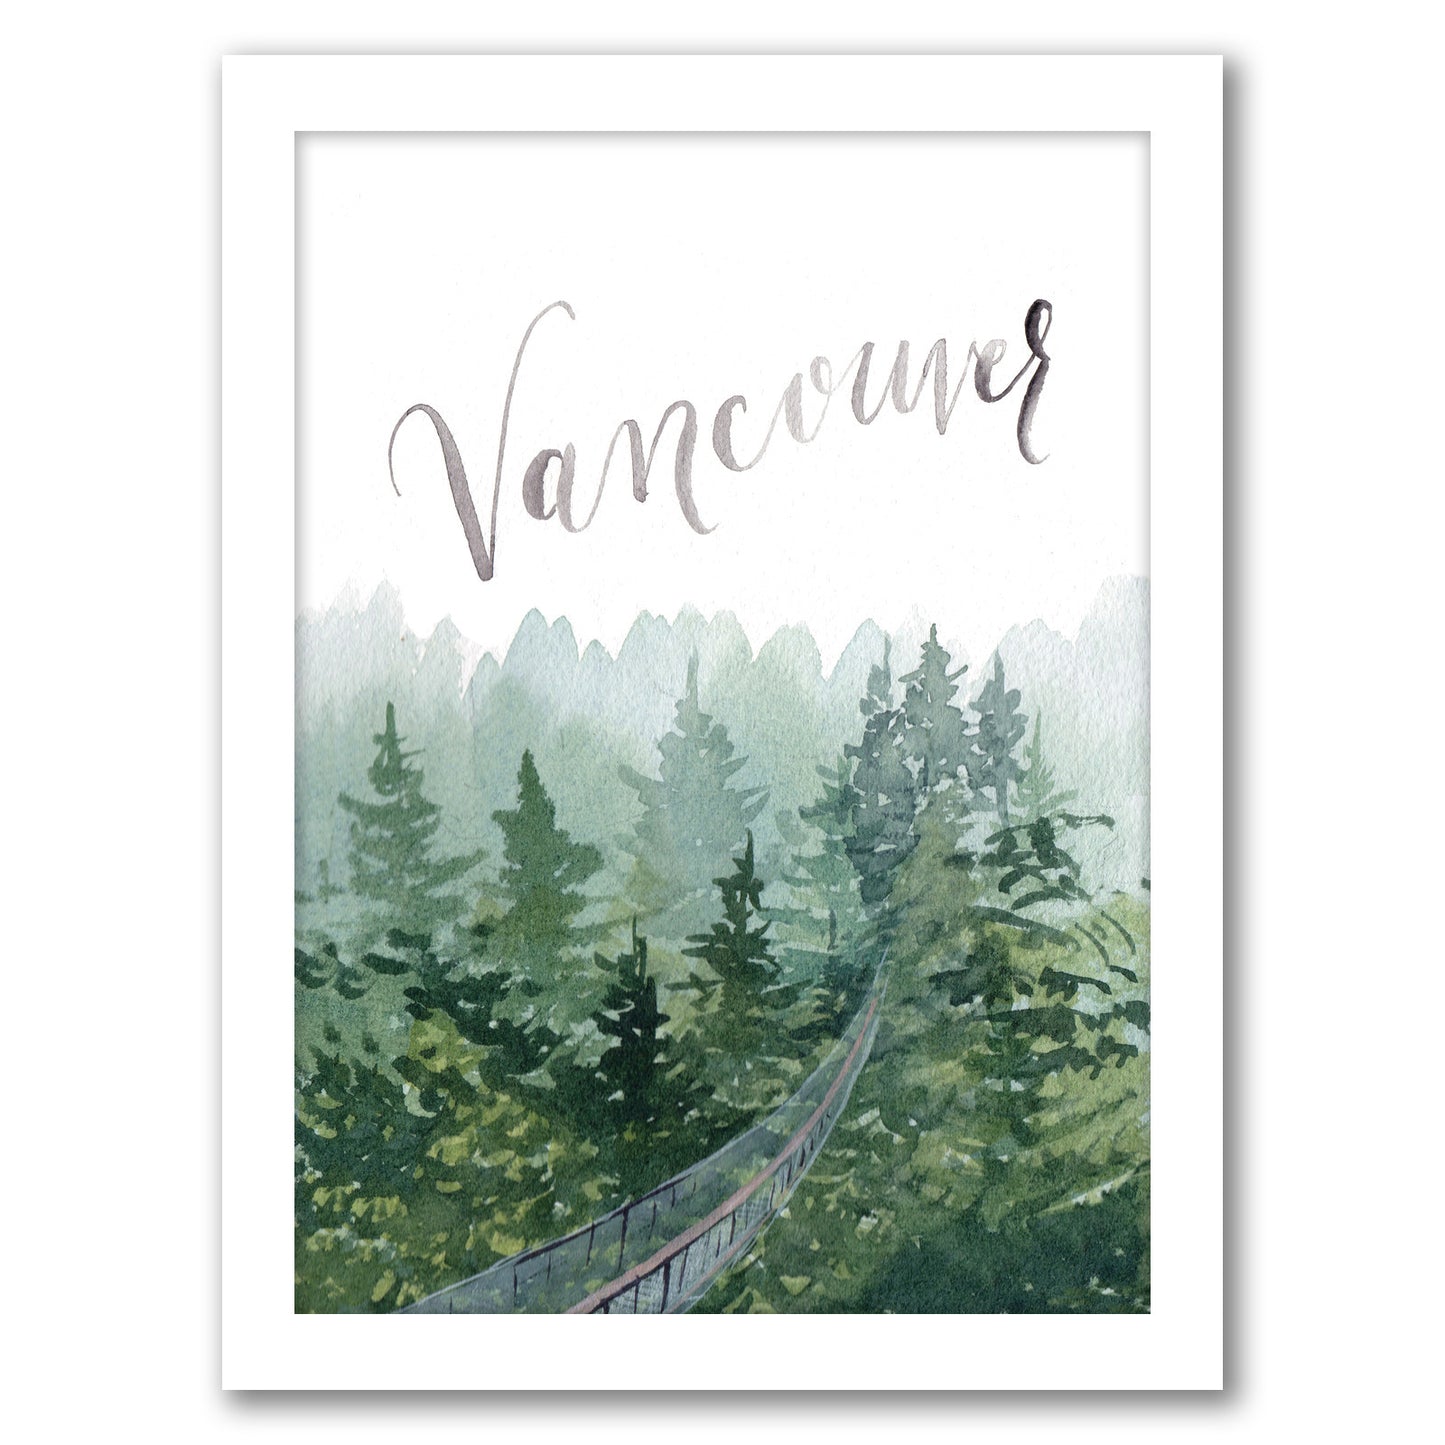 Vancouver by Cami Monet - Framed Print - Americanflat